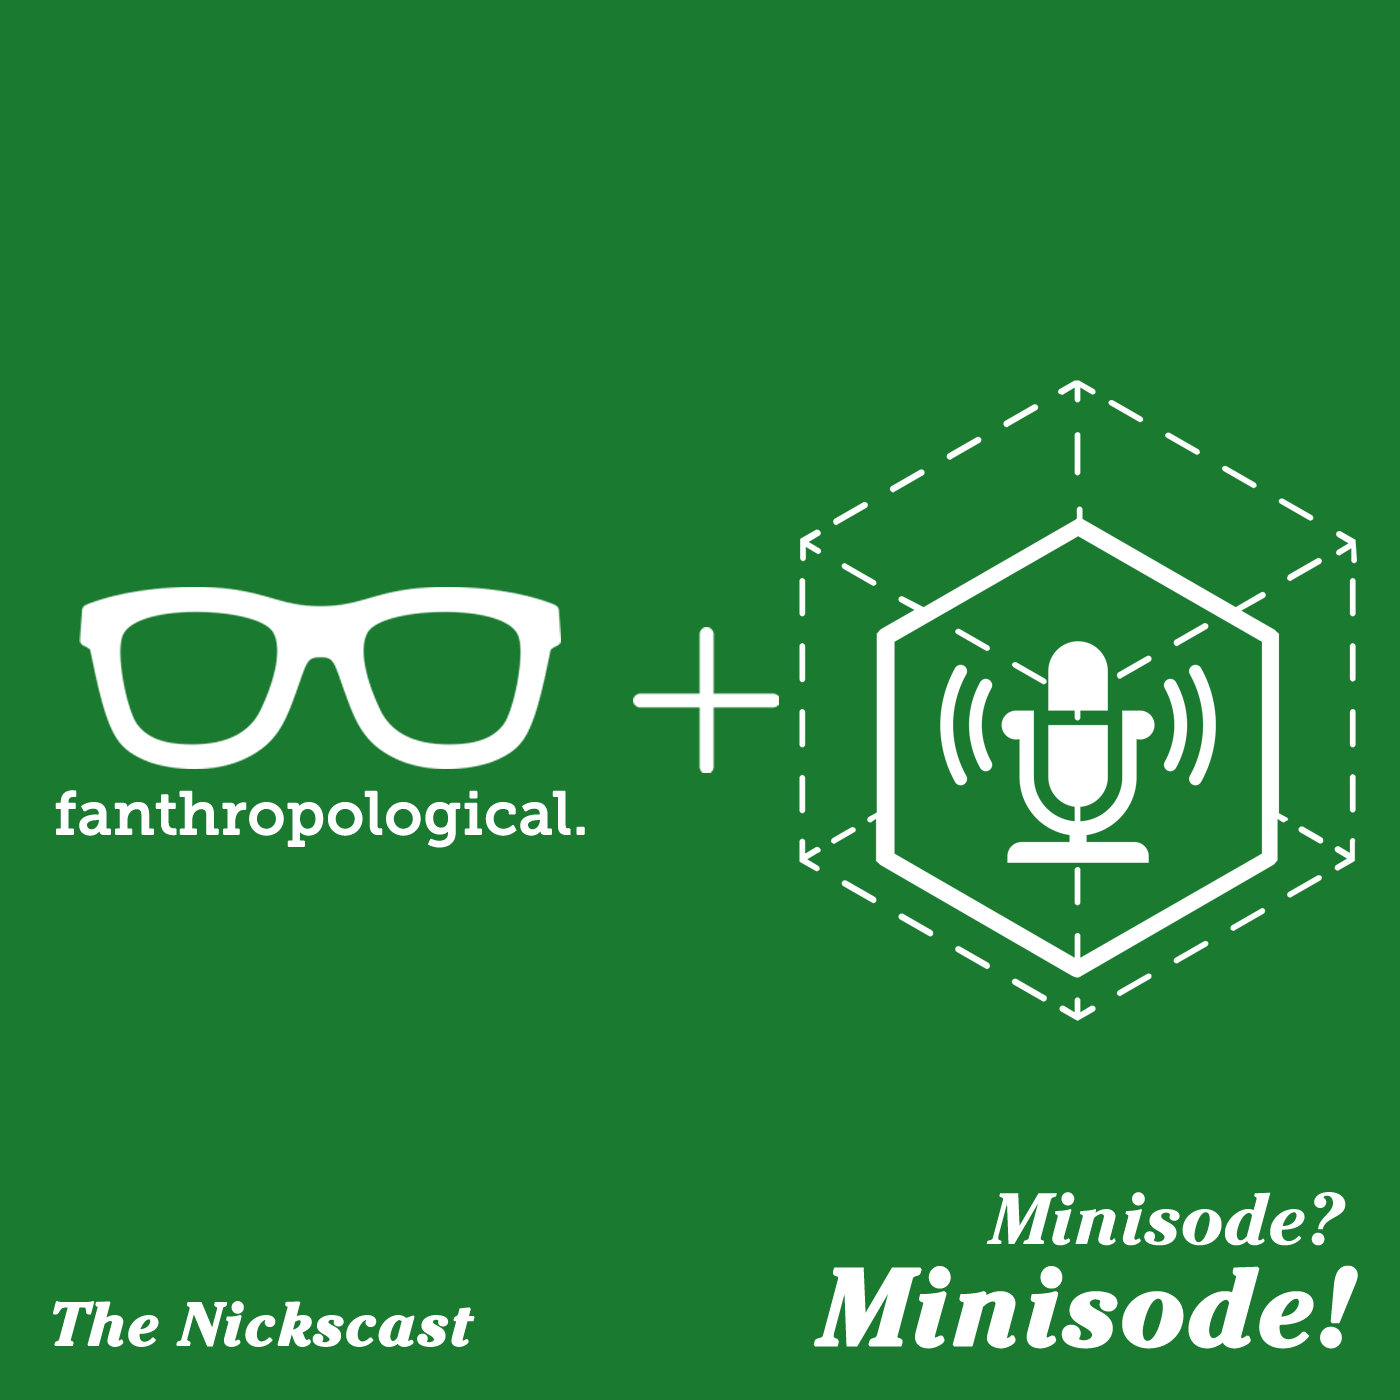 Minisode: What are cons missing?